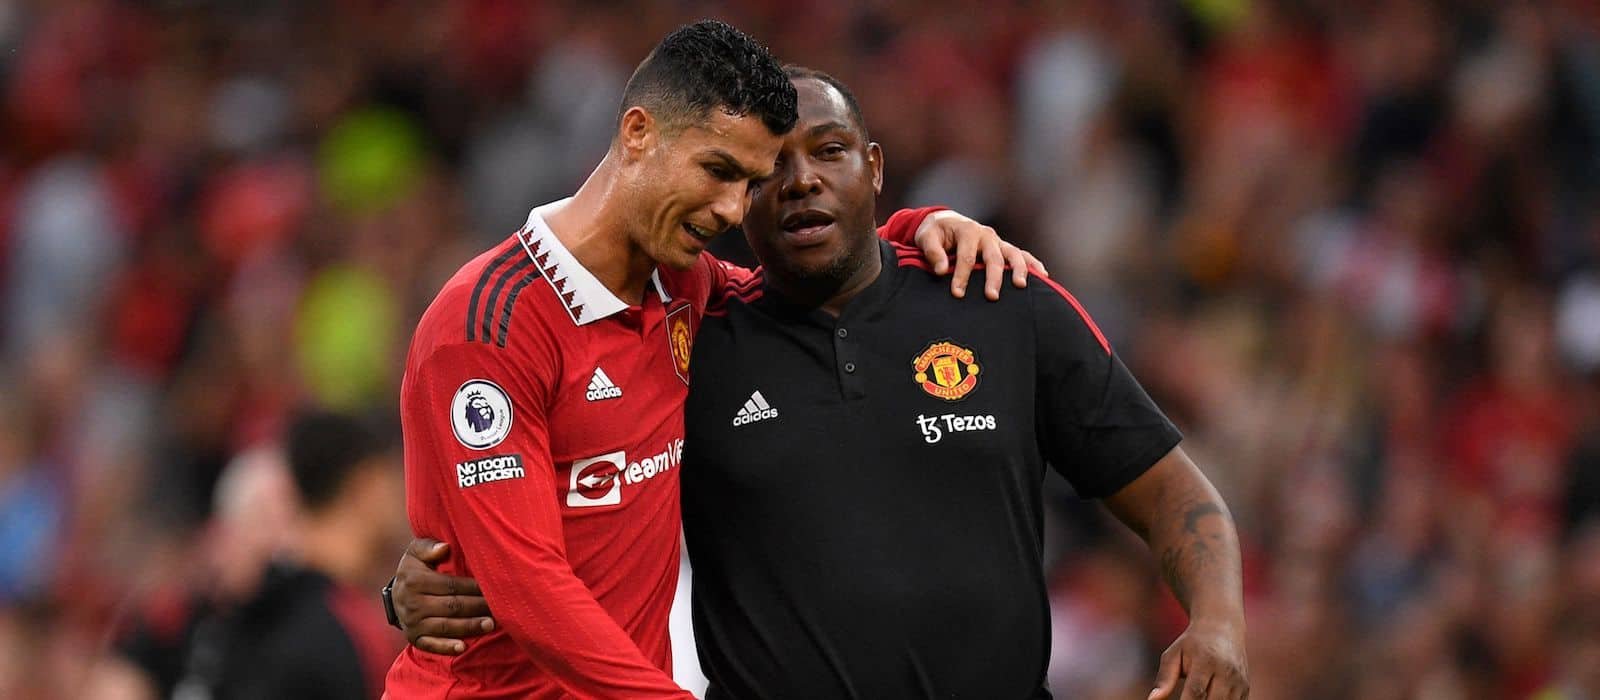 Man United coach Benni McCarthy reaffirms “dream” to leave club and pursue managerial career – Man United News And Transfer News